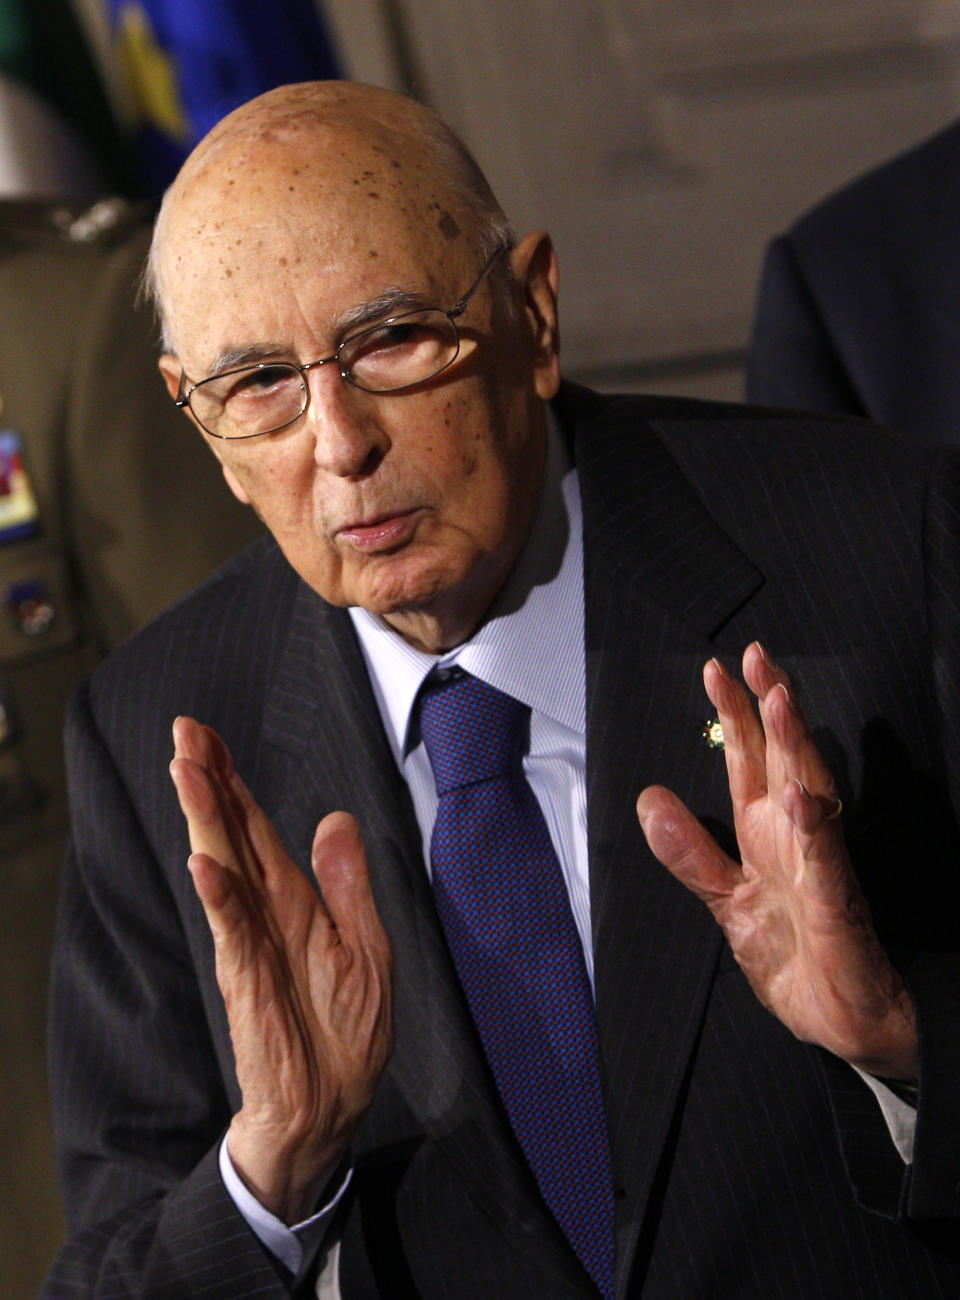 Italian President Giorgio Napolitano talks to journalists after meeting political leaders at the Quirinale presidential palace, in Rome, Saturday, Feb. 15, 2014. Italy's president is consulting with political party leaders to determine if Democratic Party leader Matteo Renzi has enough support to form a new government. (AP Photo/Riccardo De Luca)